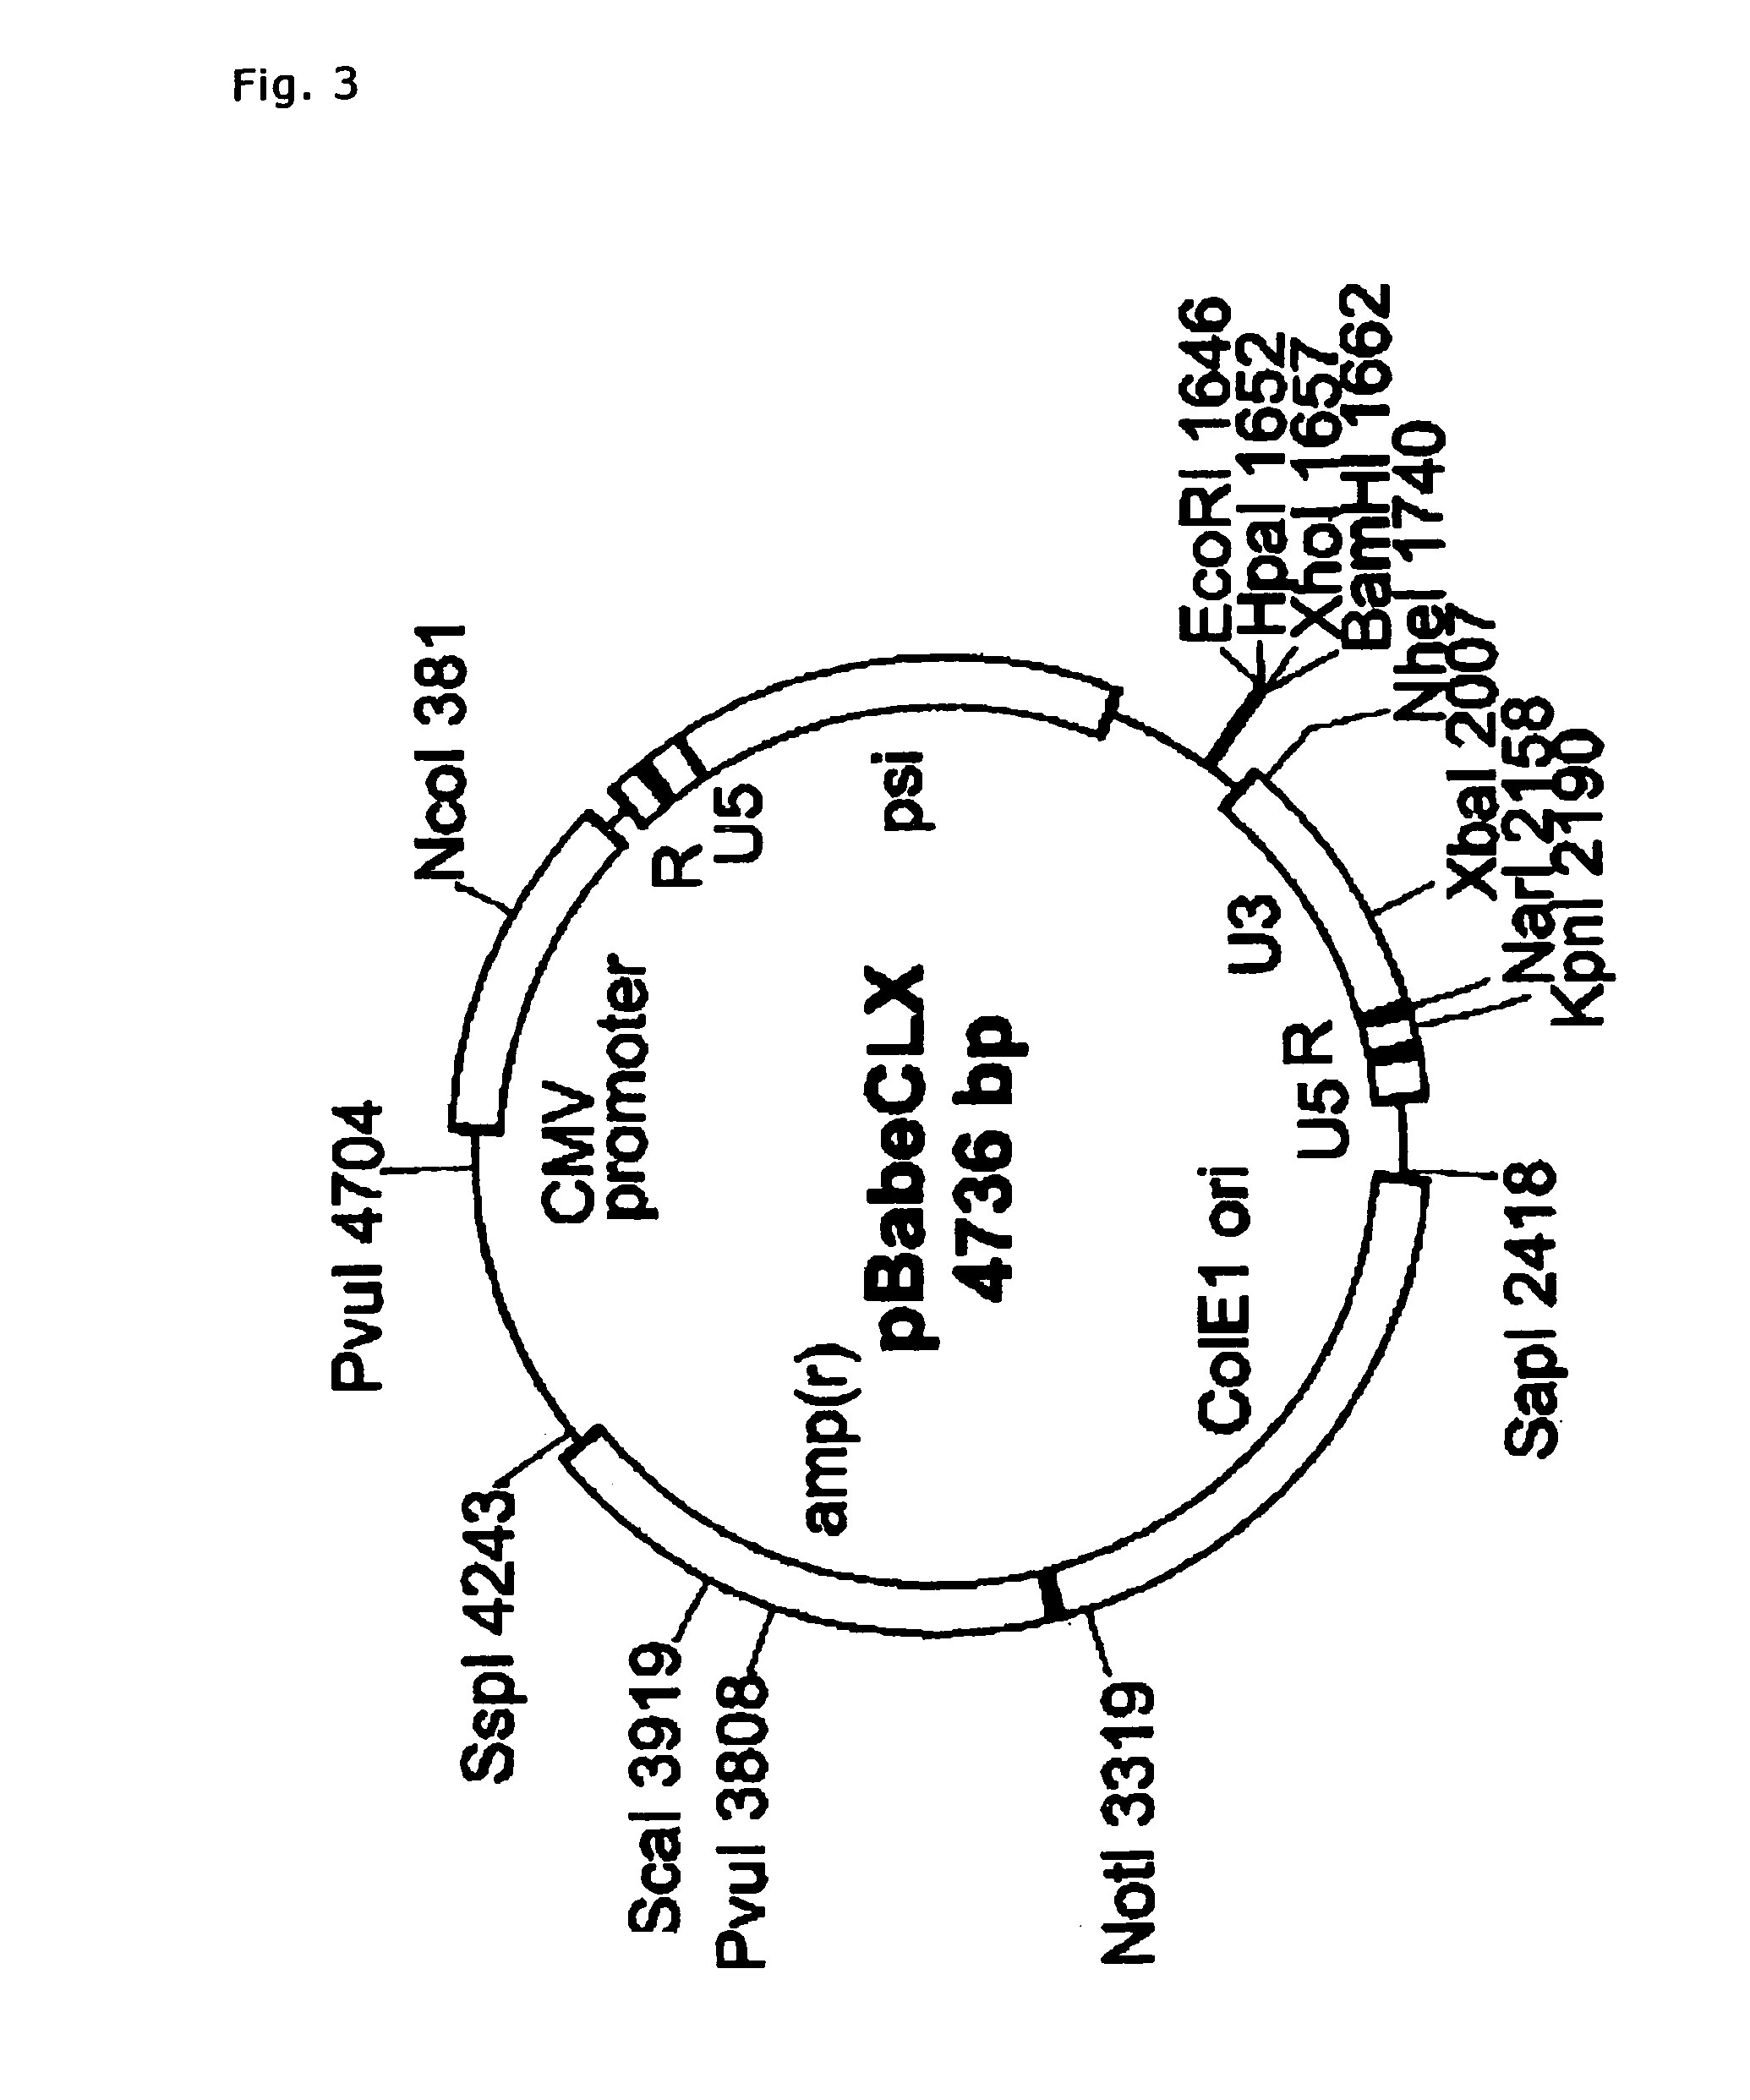 Method of screening substance useful in treating disease with the use of GPR40 and phospholipase